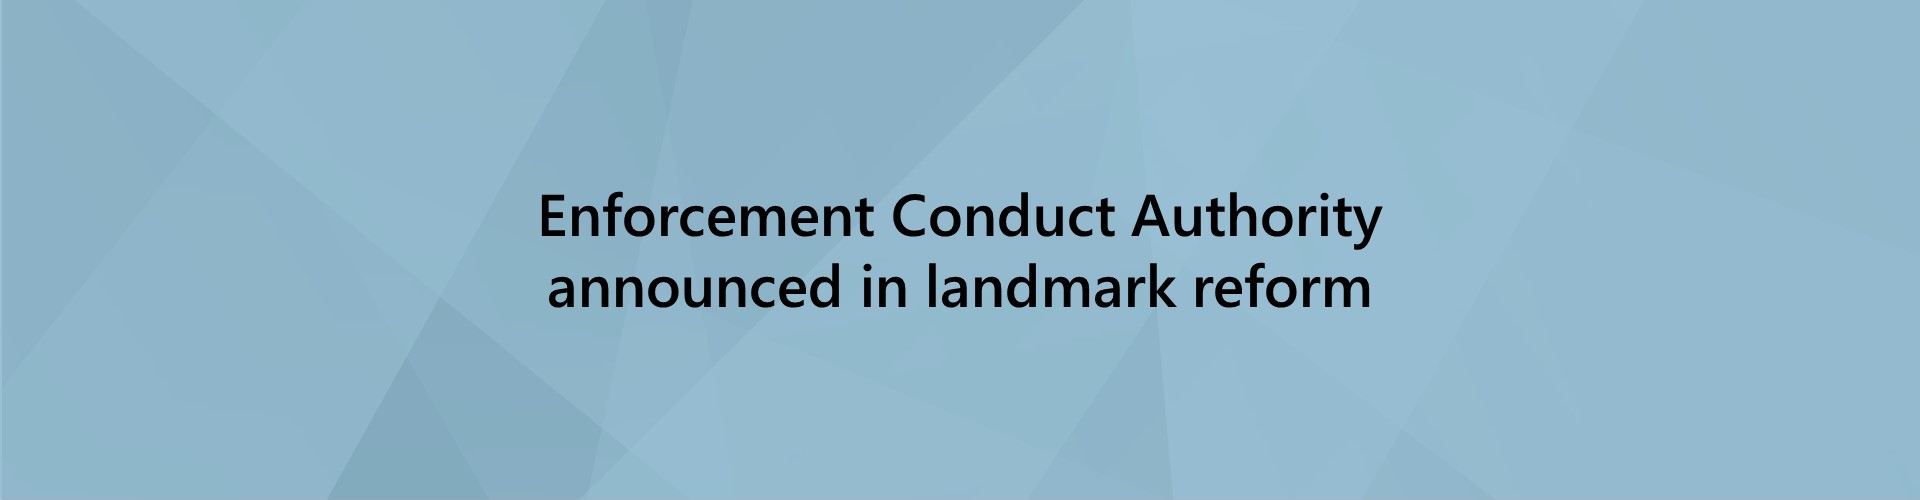 Enforcement conduct authority announced banner image